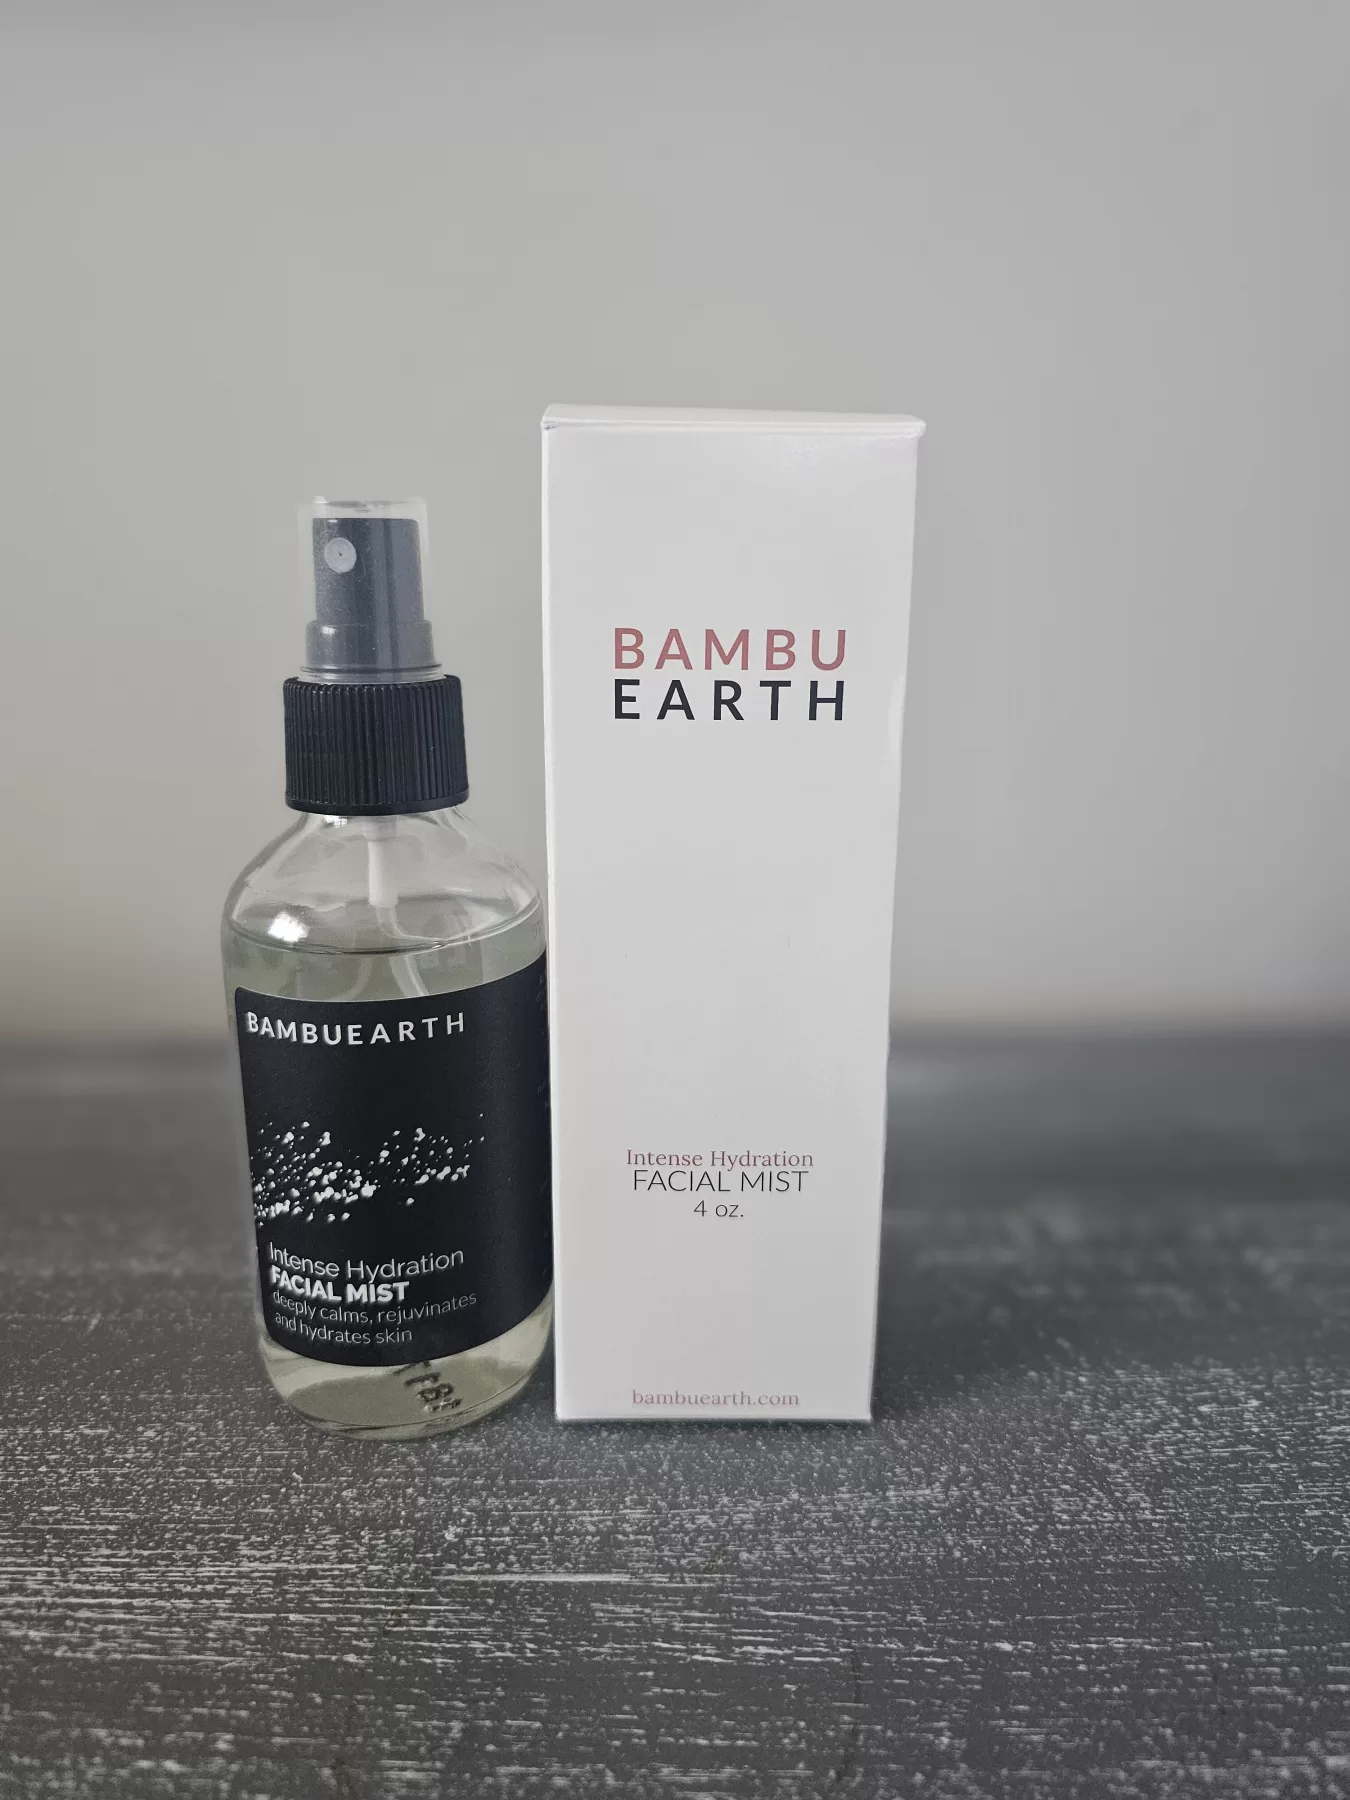 Bambu Earth Review- woodsy and herbal blend is calming, hydrating and rejuvenating, and only uses 3 ingredients, ethically and sustainably sourced from the Earth.